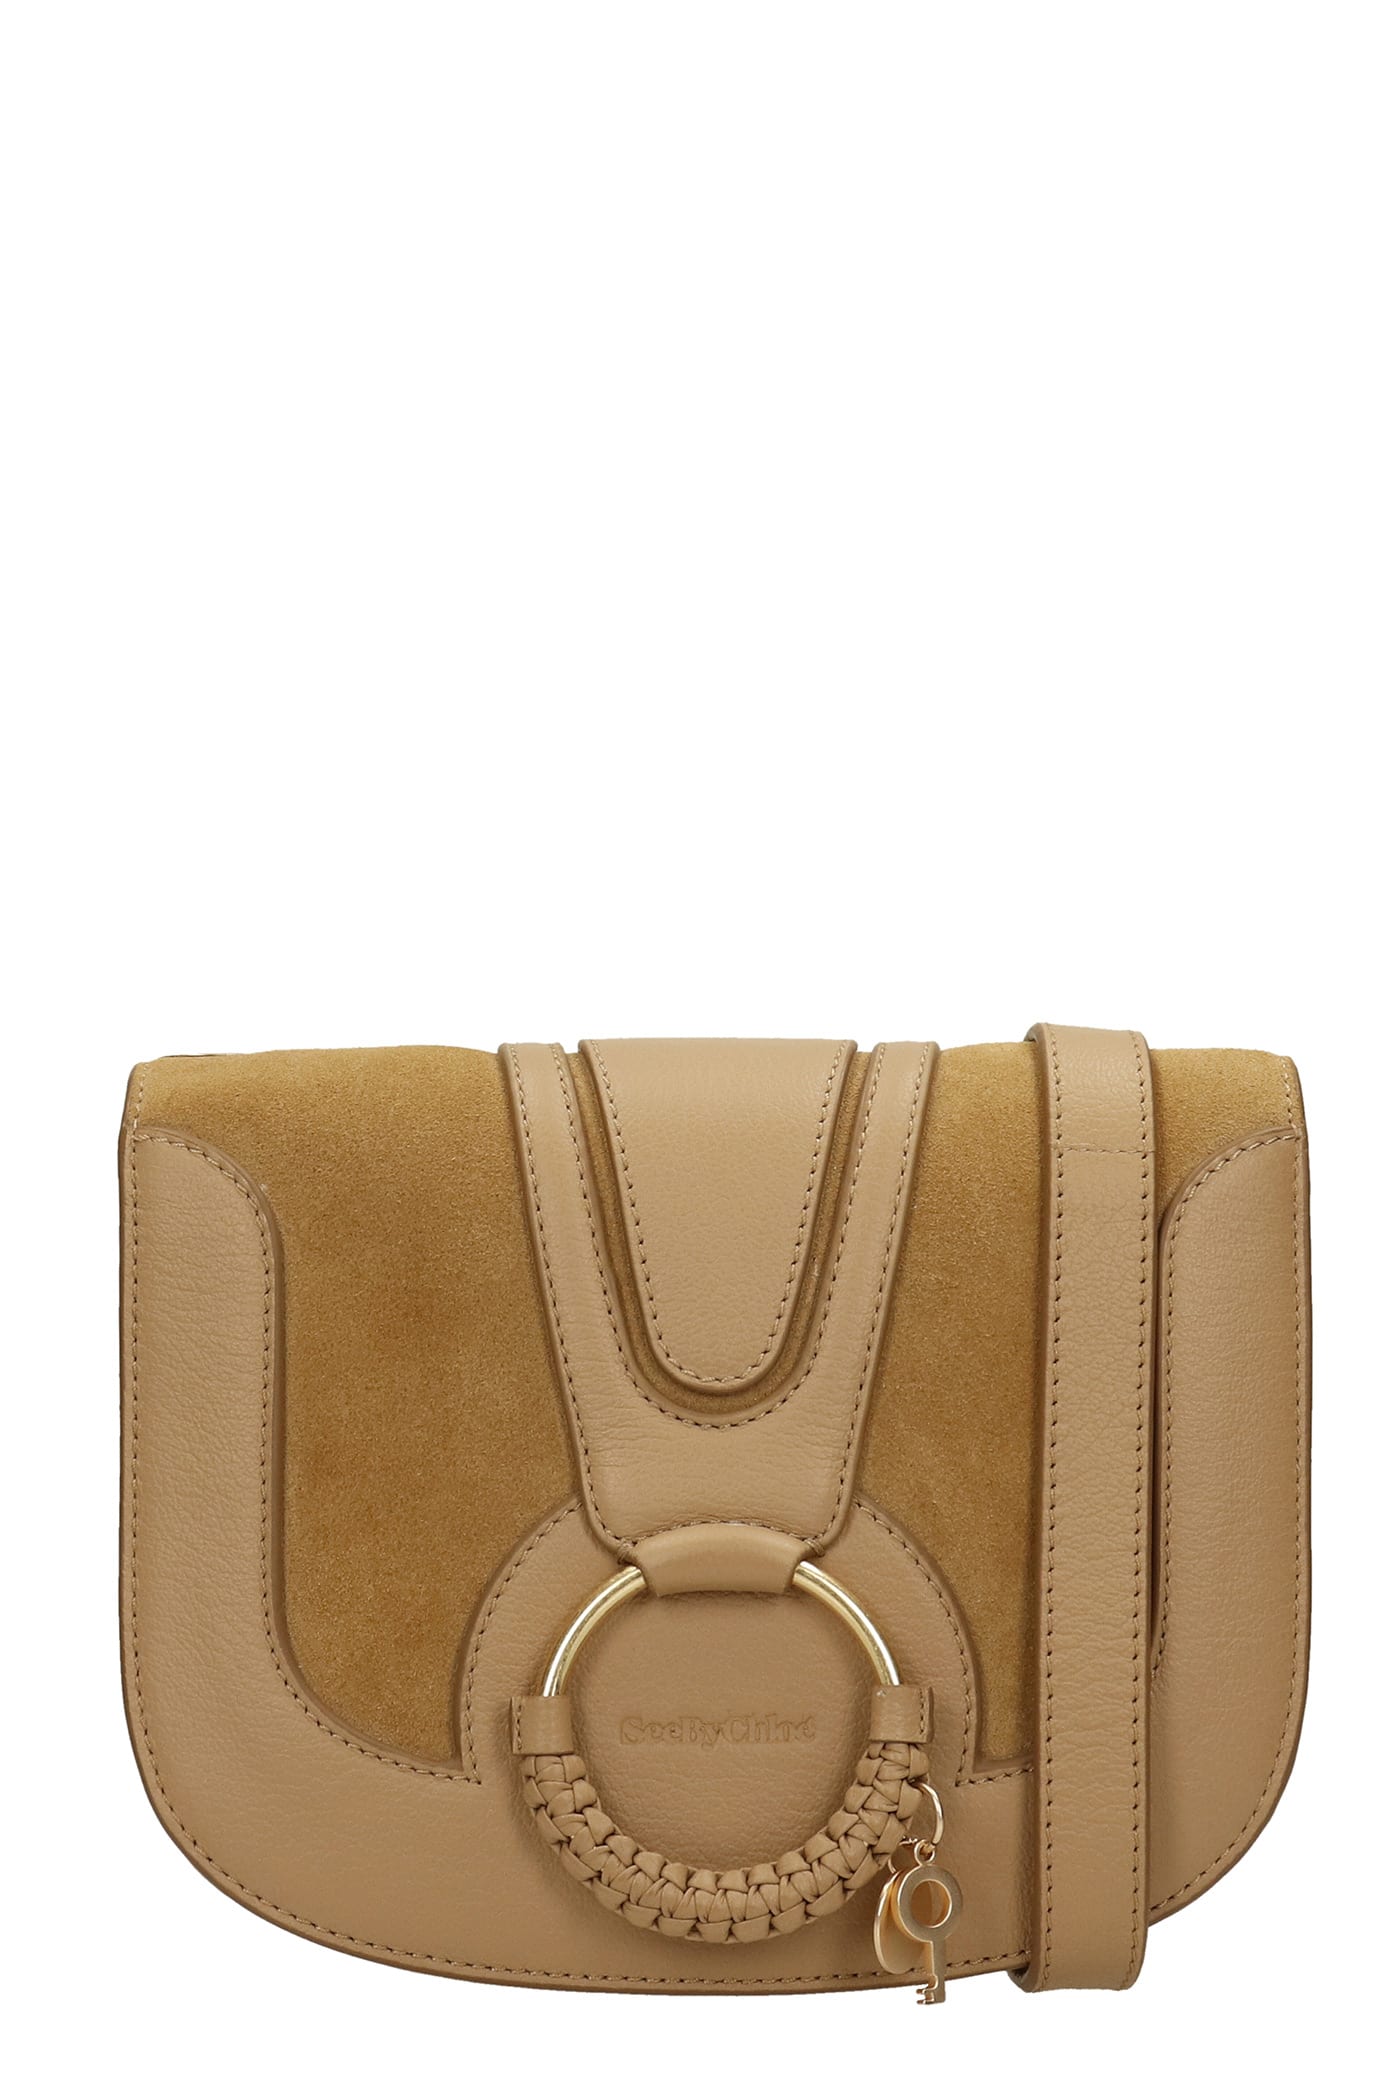 See by Chloé Hana Shoulder Bag In Beige Suede And Leather